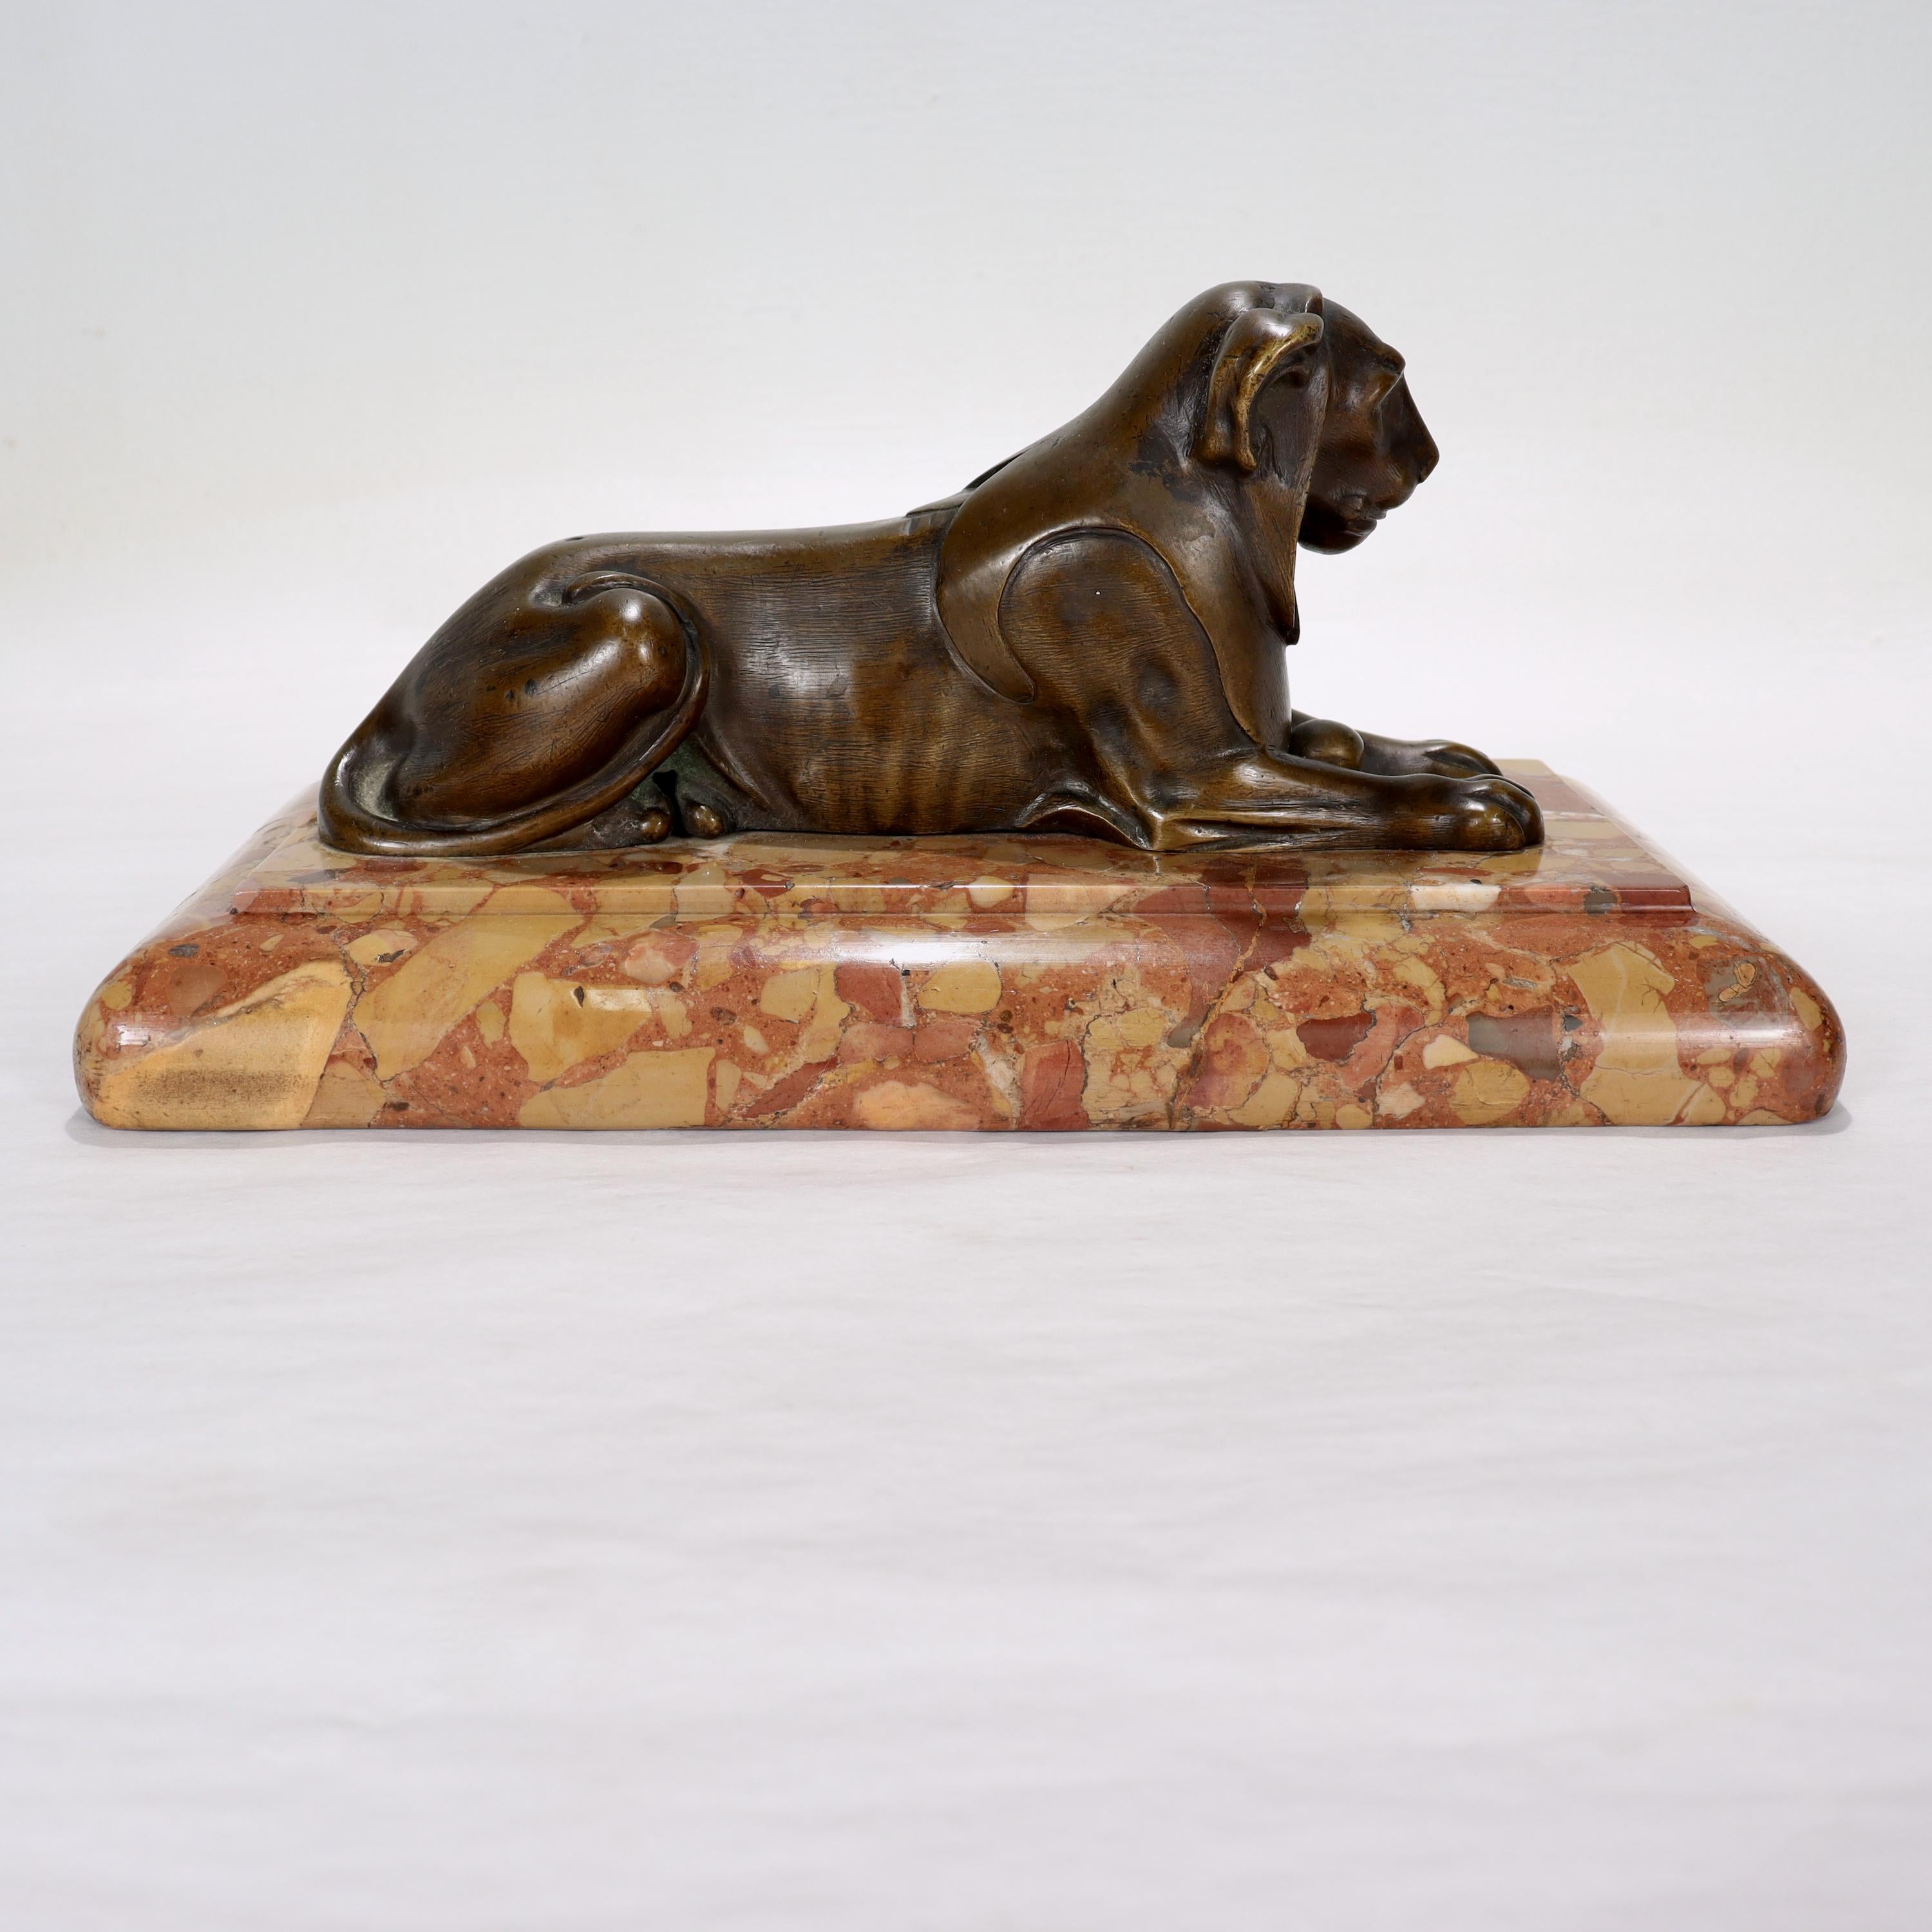 19th Century Antique Egyptian Revival Bronze Sculpture of a Lion on a Marble Plinth For Sale